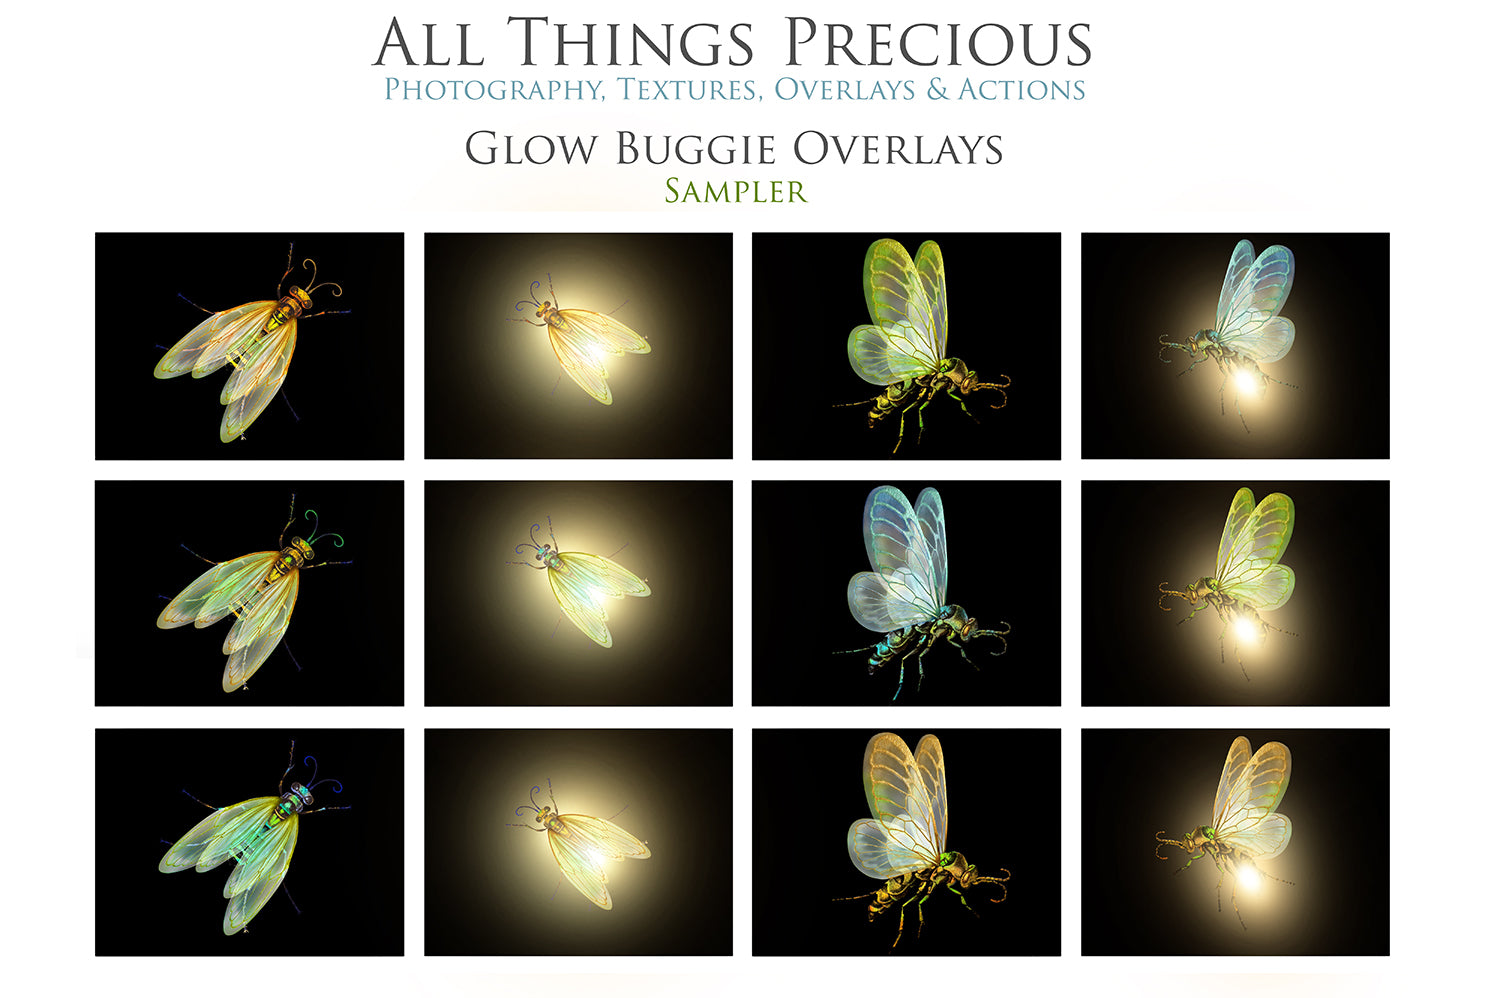 Png overlays for photography and digital art. Firefly overlays, glow overlays, photo overlays, png digital overlays, high resolution overlays for photographers by ATP textures.